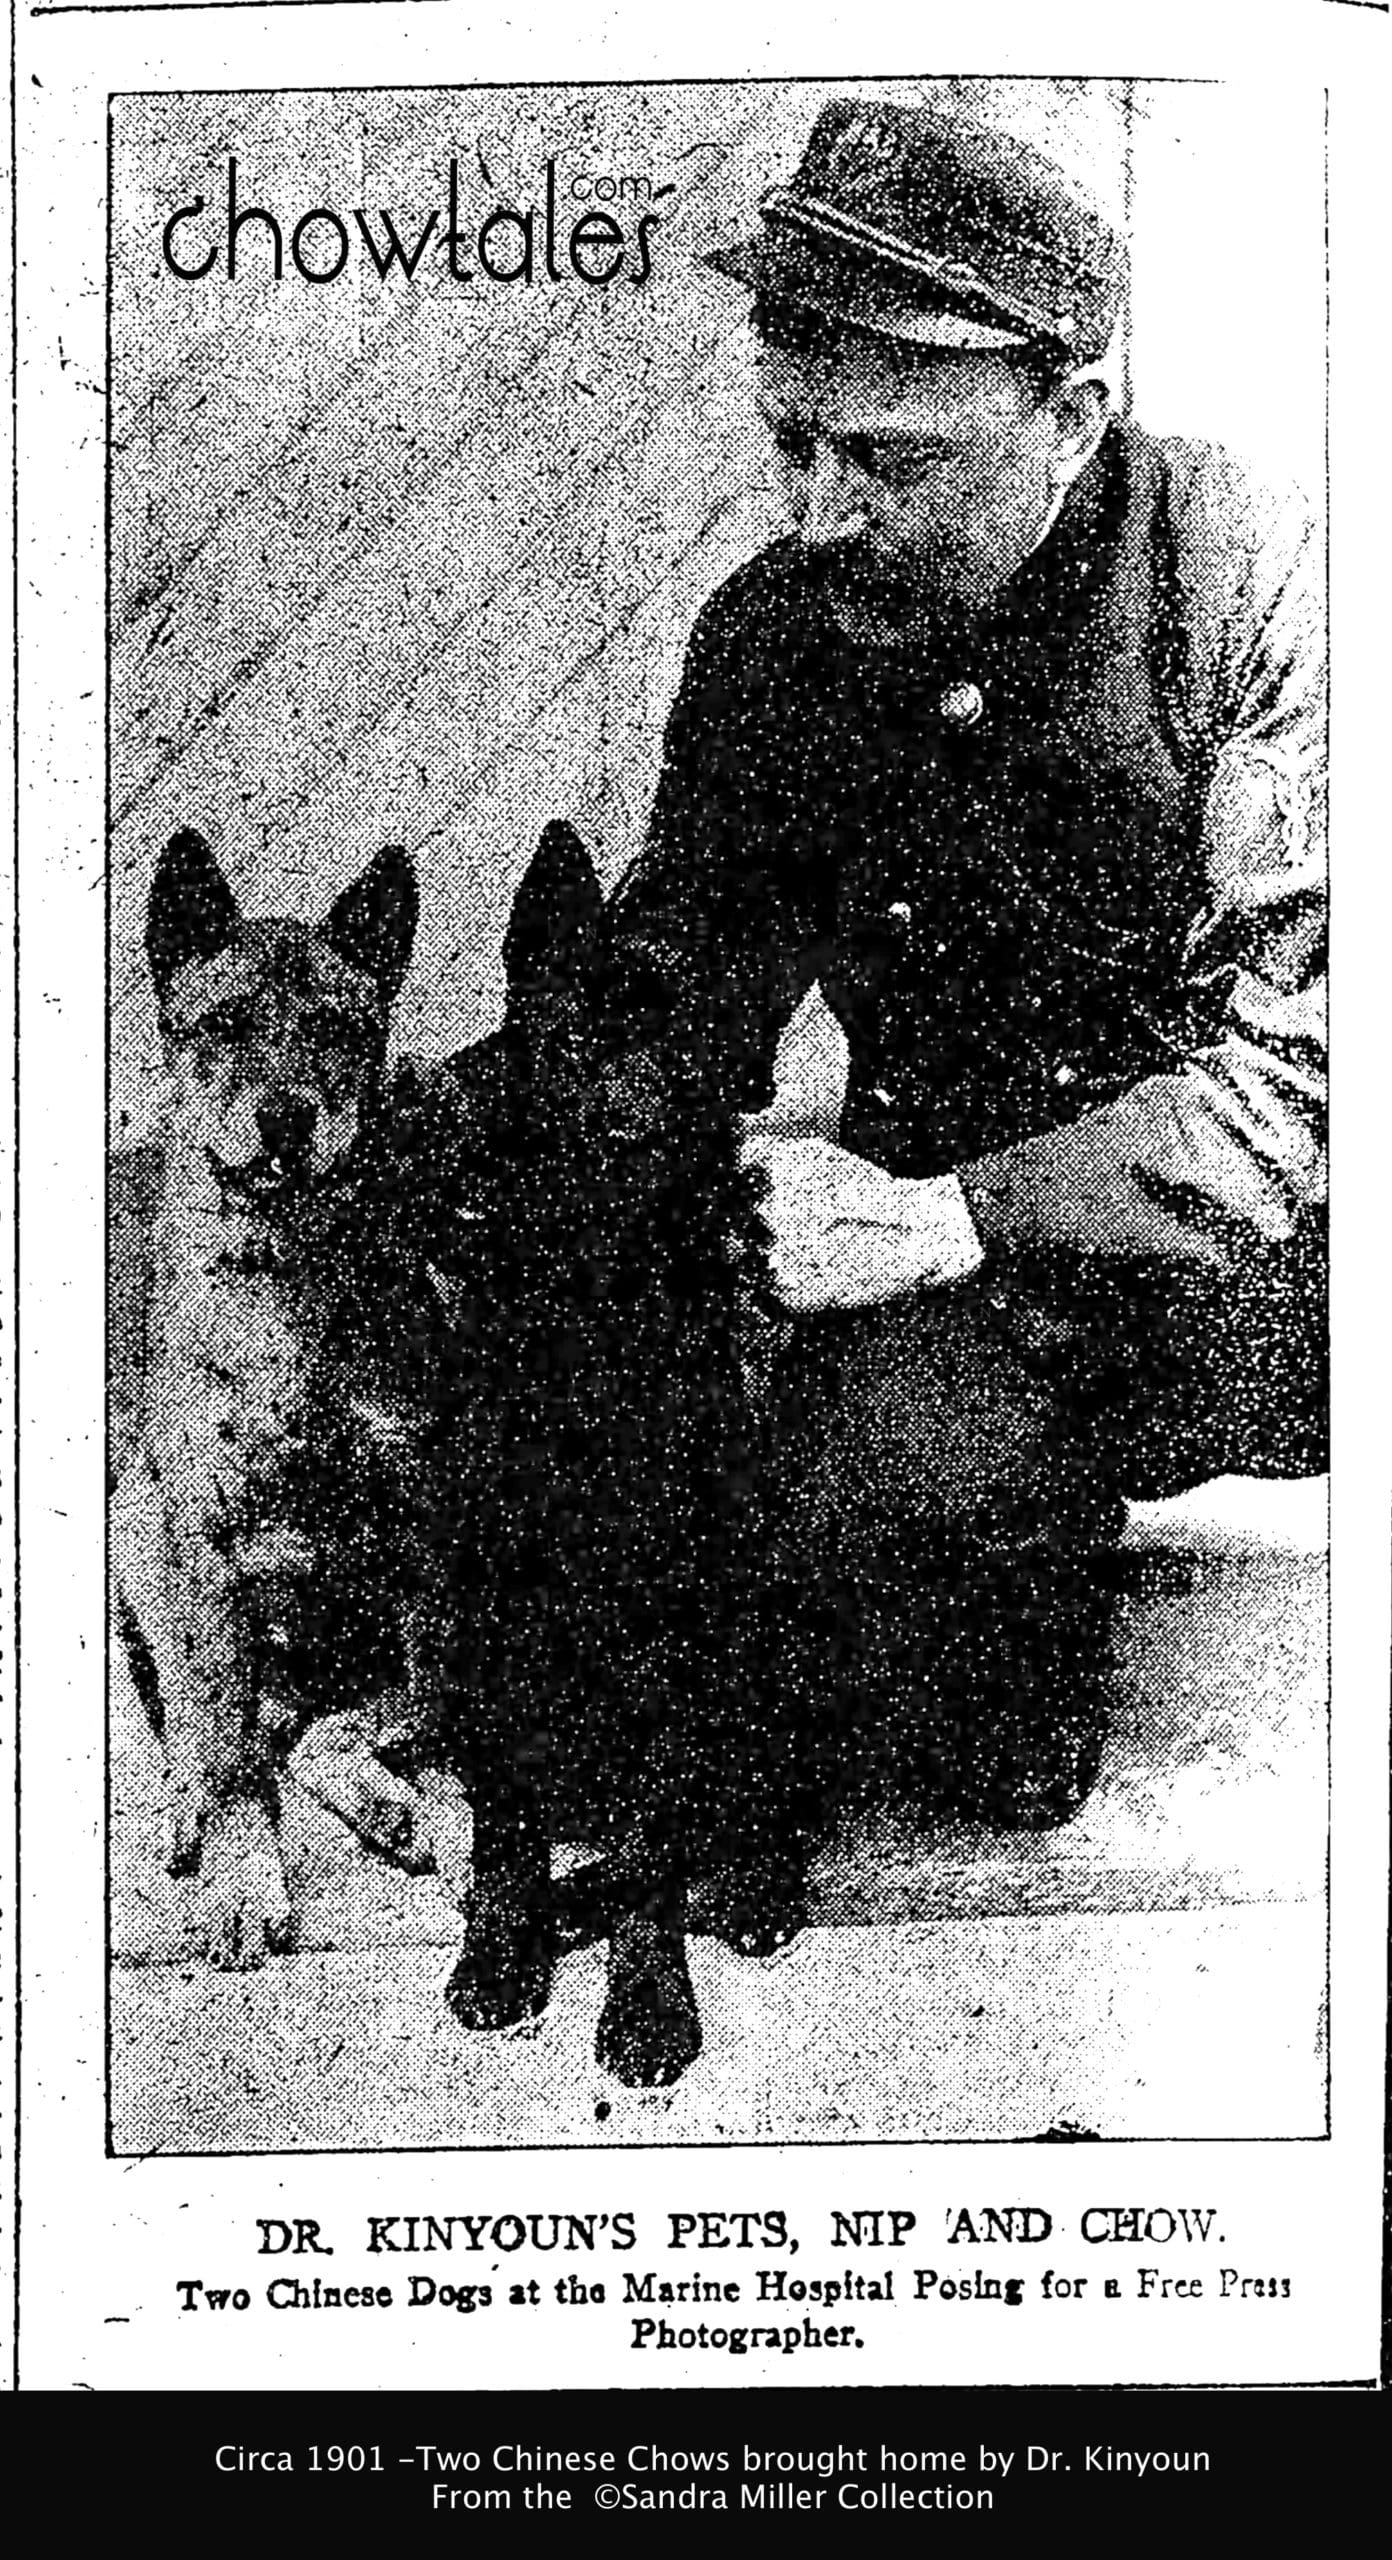 DR KINYON 1901 BRINGS 2 CHINESE DOGS TO MARINE HOSPITAL